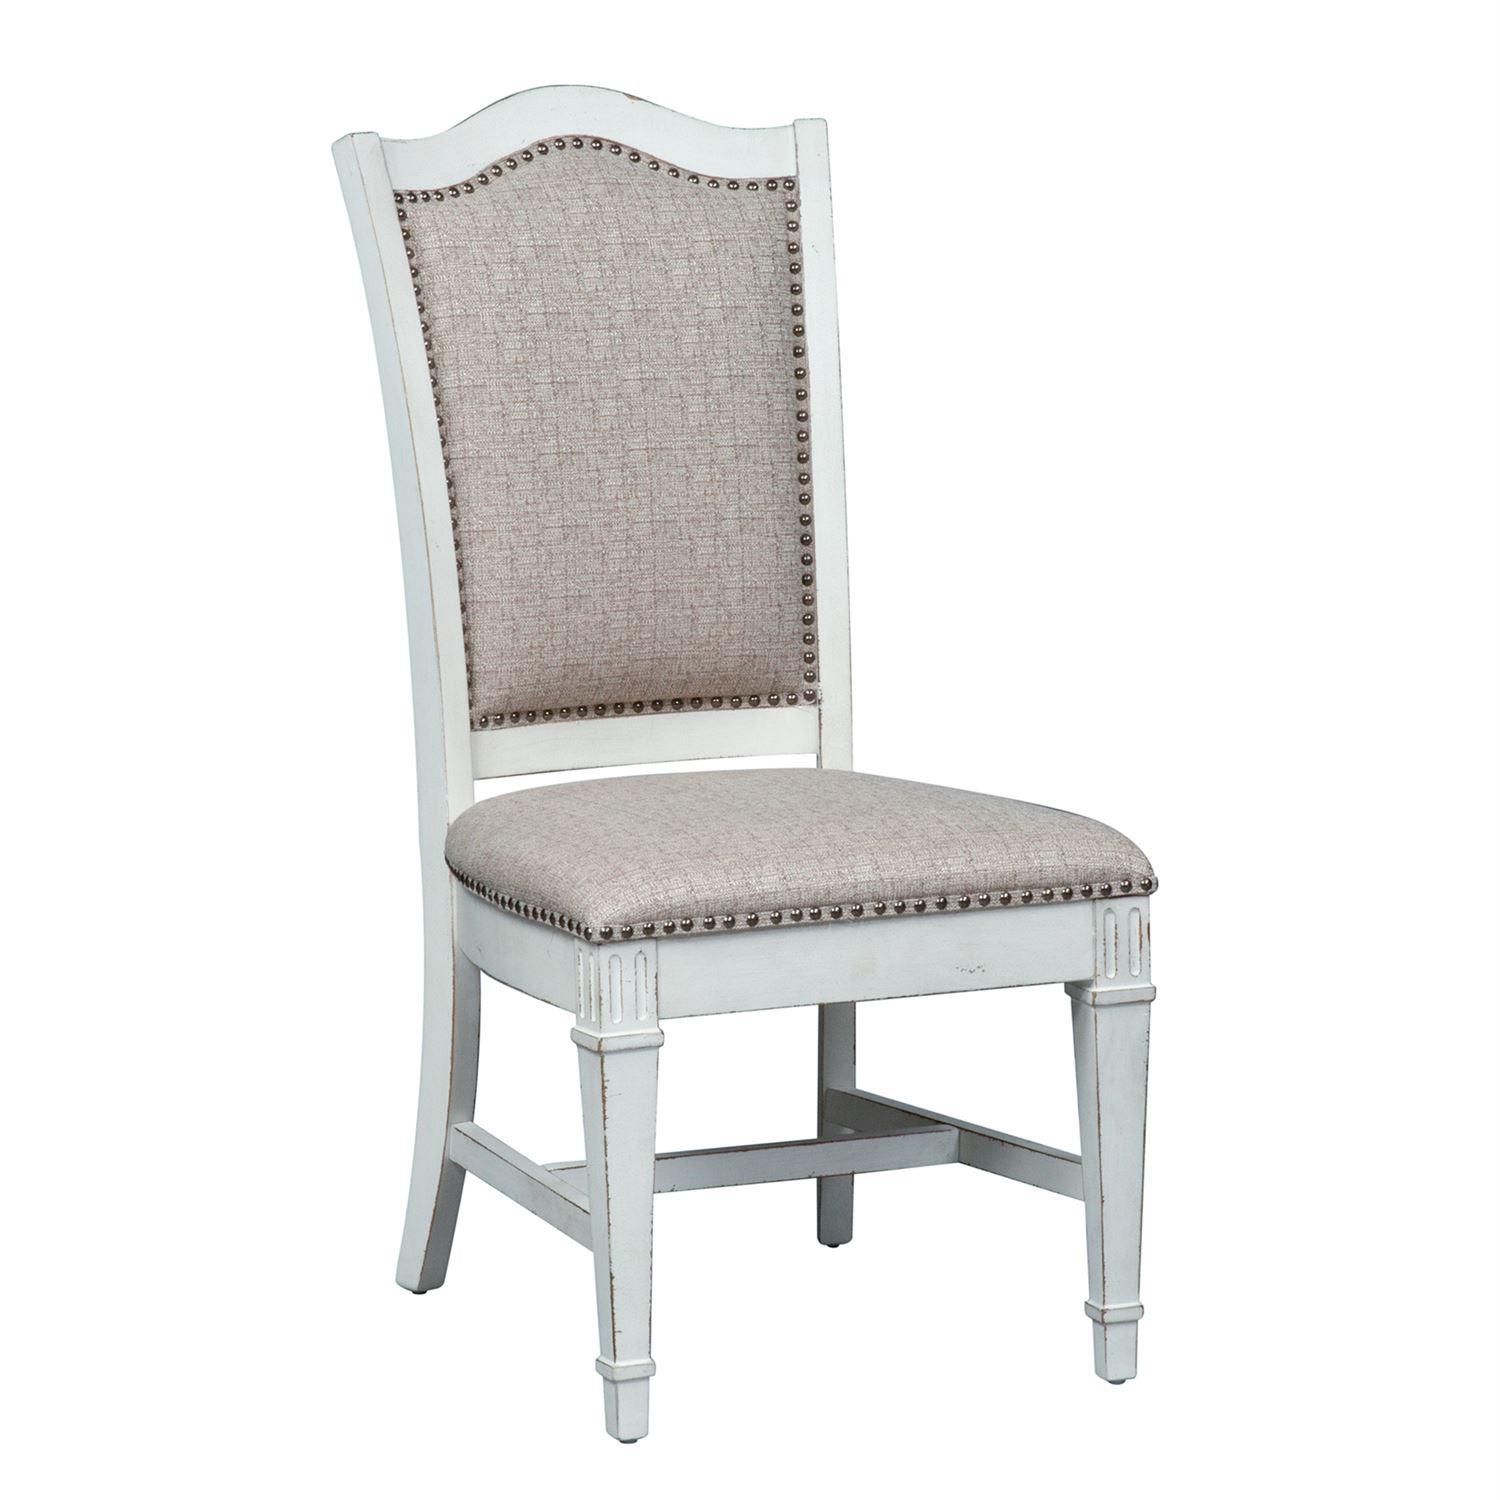 Traditional Dining Chair Abbey Park 520-C6501S 520-C6501S-Set-2 in White 